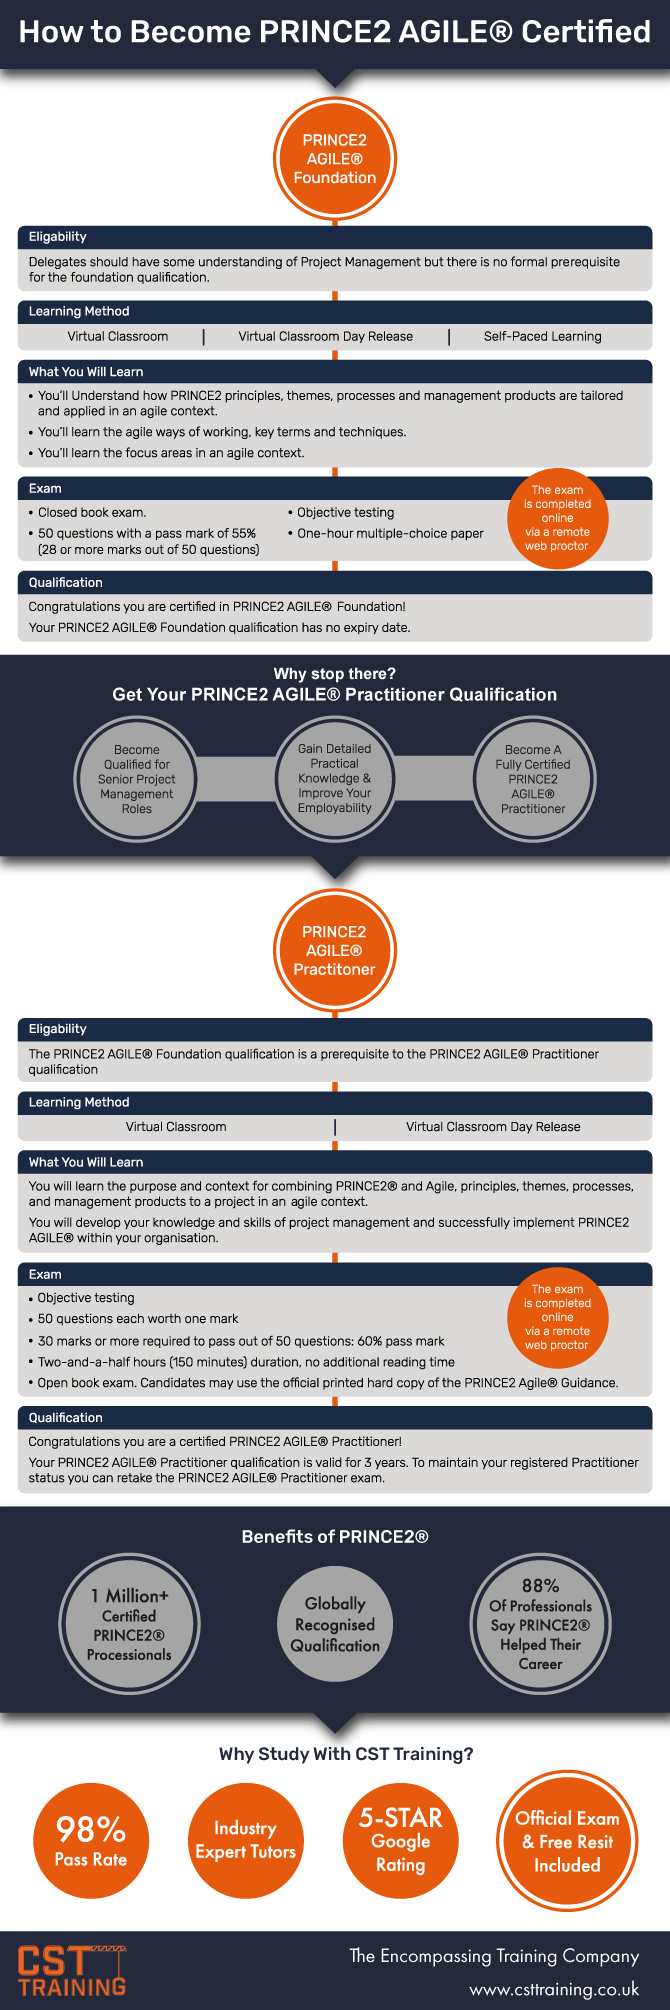 PRINCE2 Agile infographic visualising the progression route of foundation to practitioner